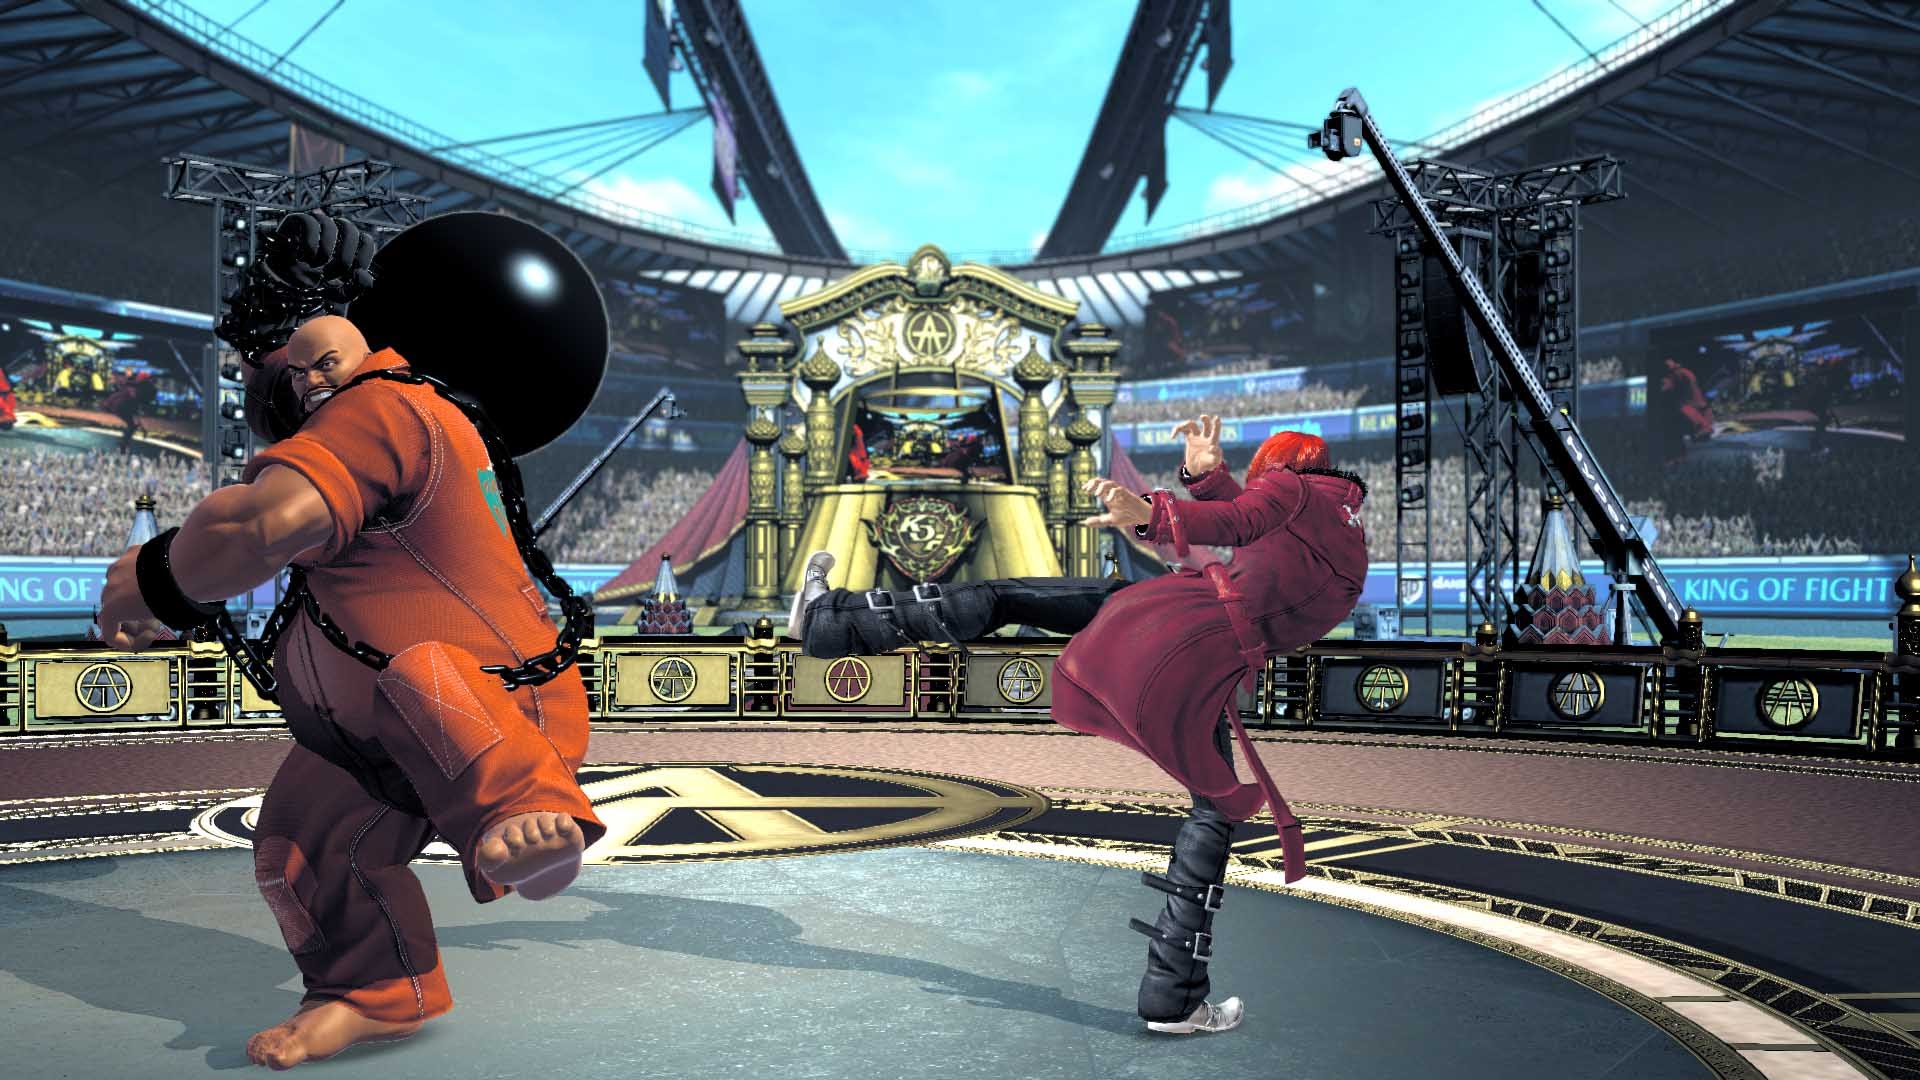 Amazing The King Of Fighters XIV Pictures & Backgrounds